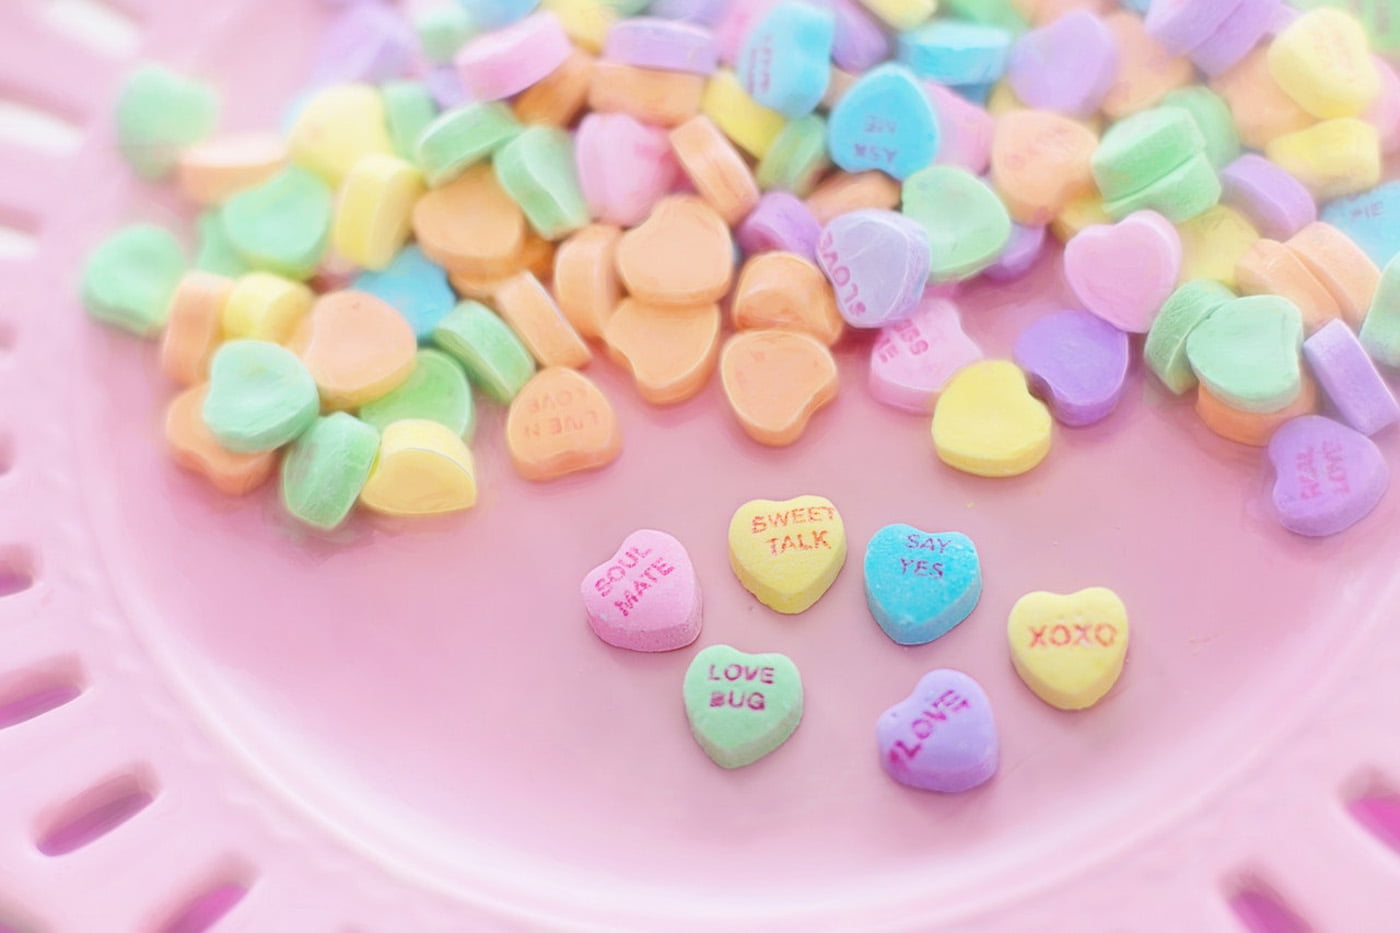 Our Favourite Super Simple Valentine's Day Ideas